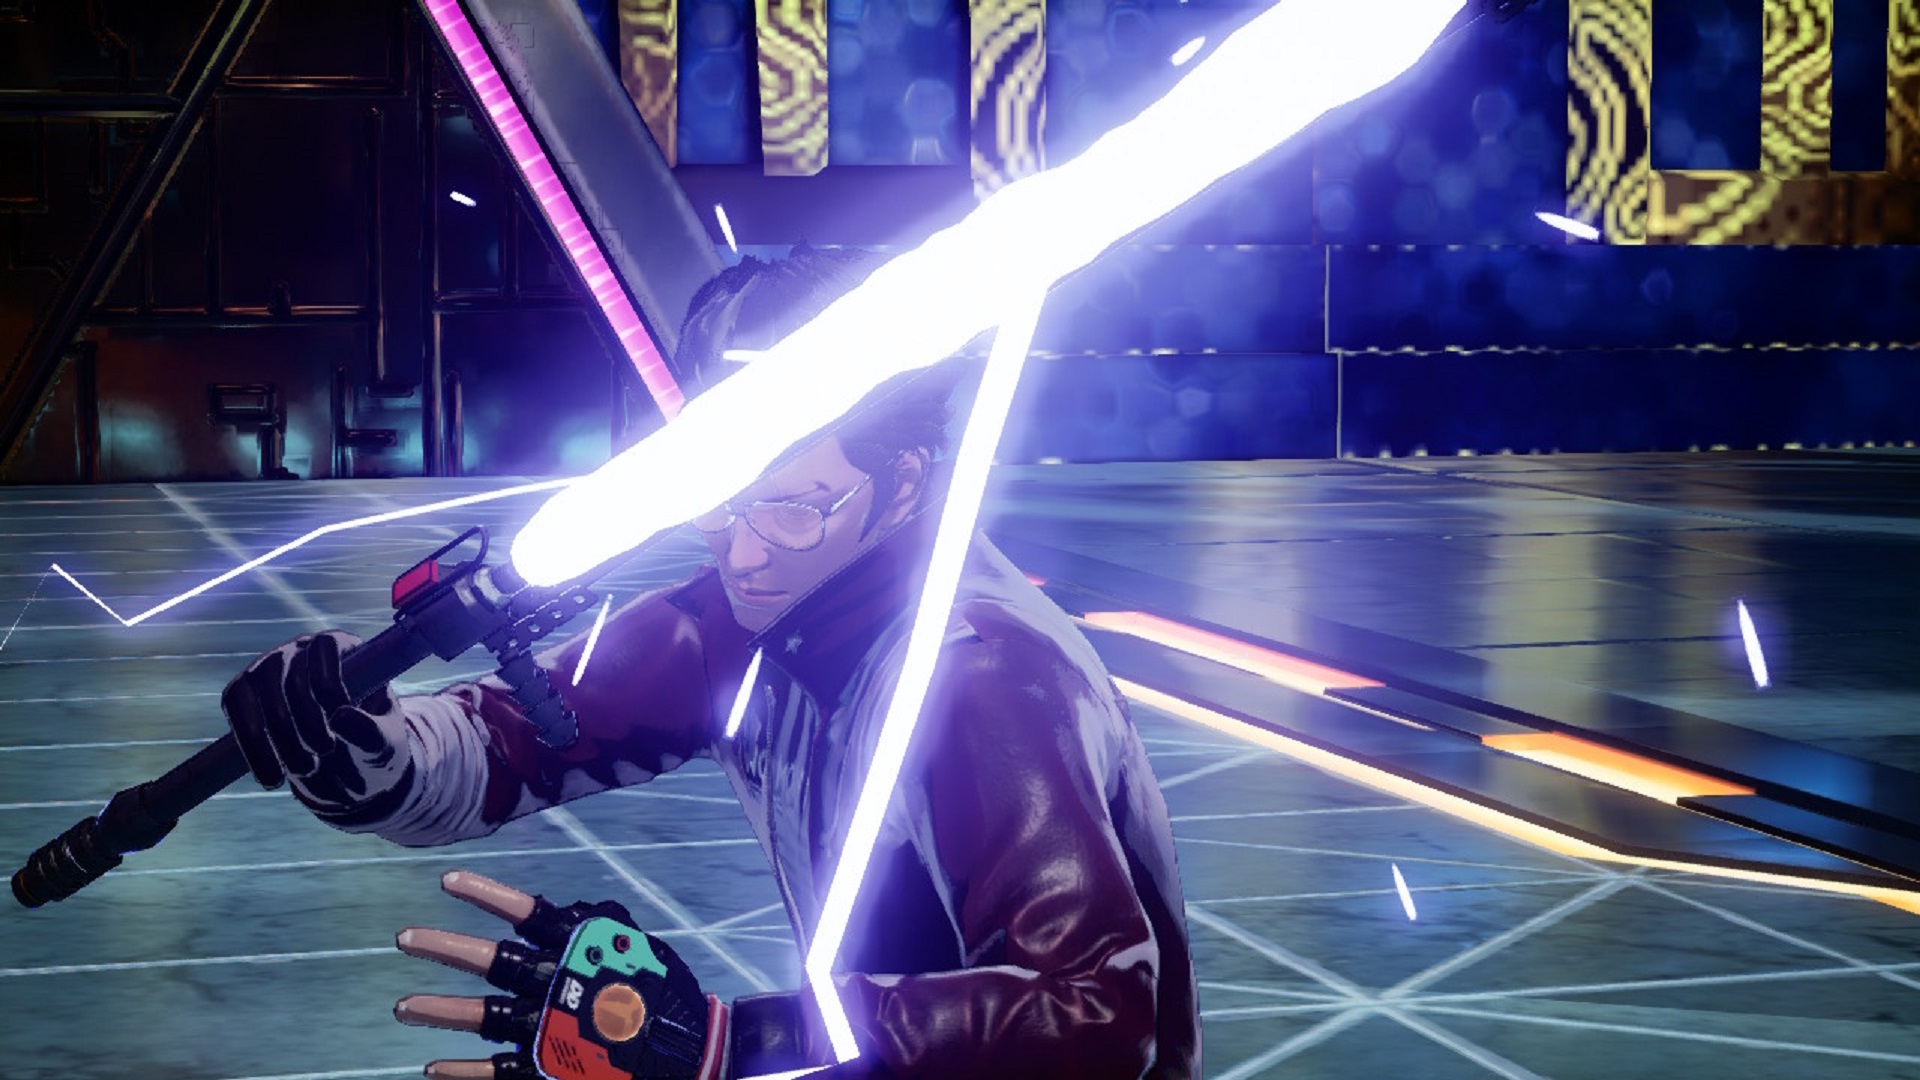 No More Heroes 3 Will Require 6.8 GB of Storage Space on Your Switch